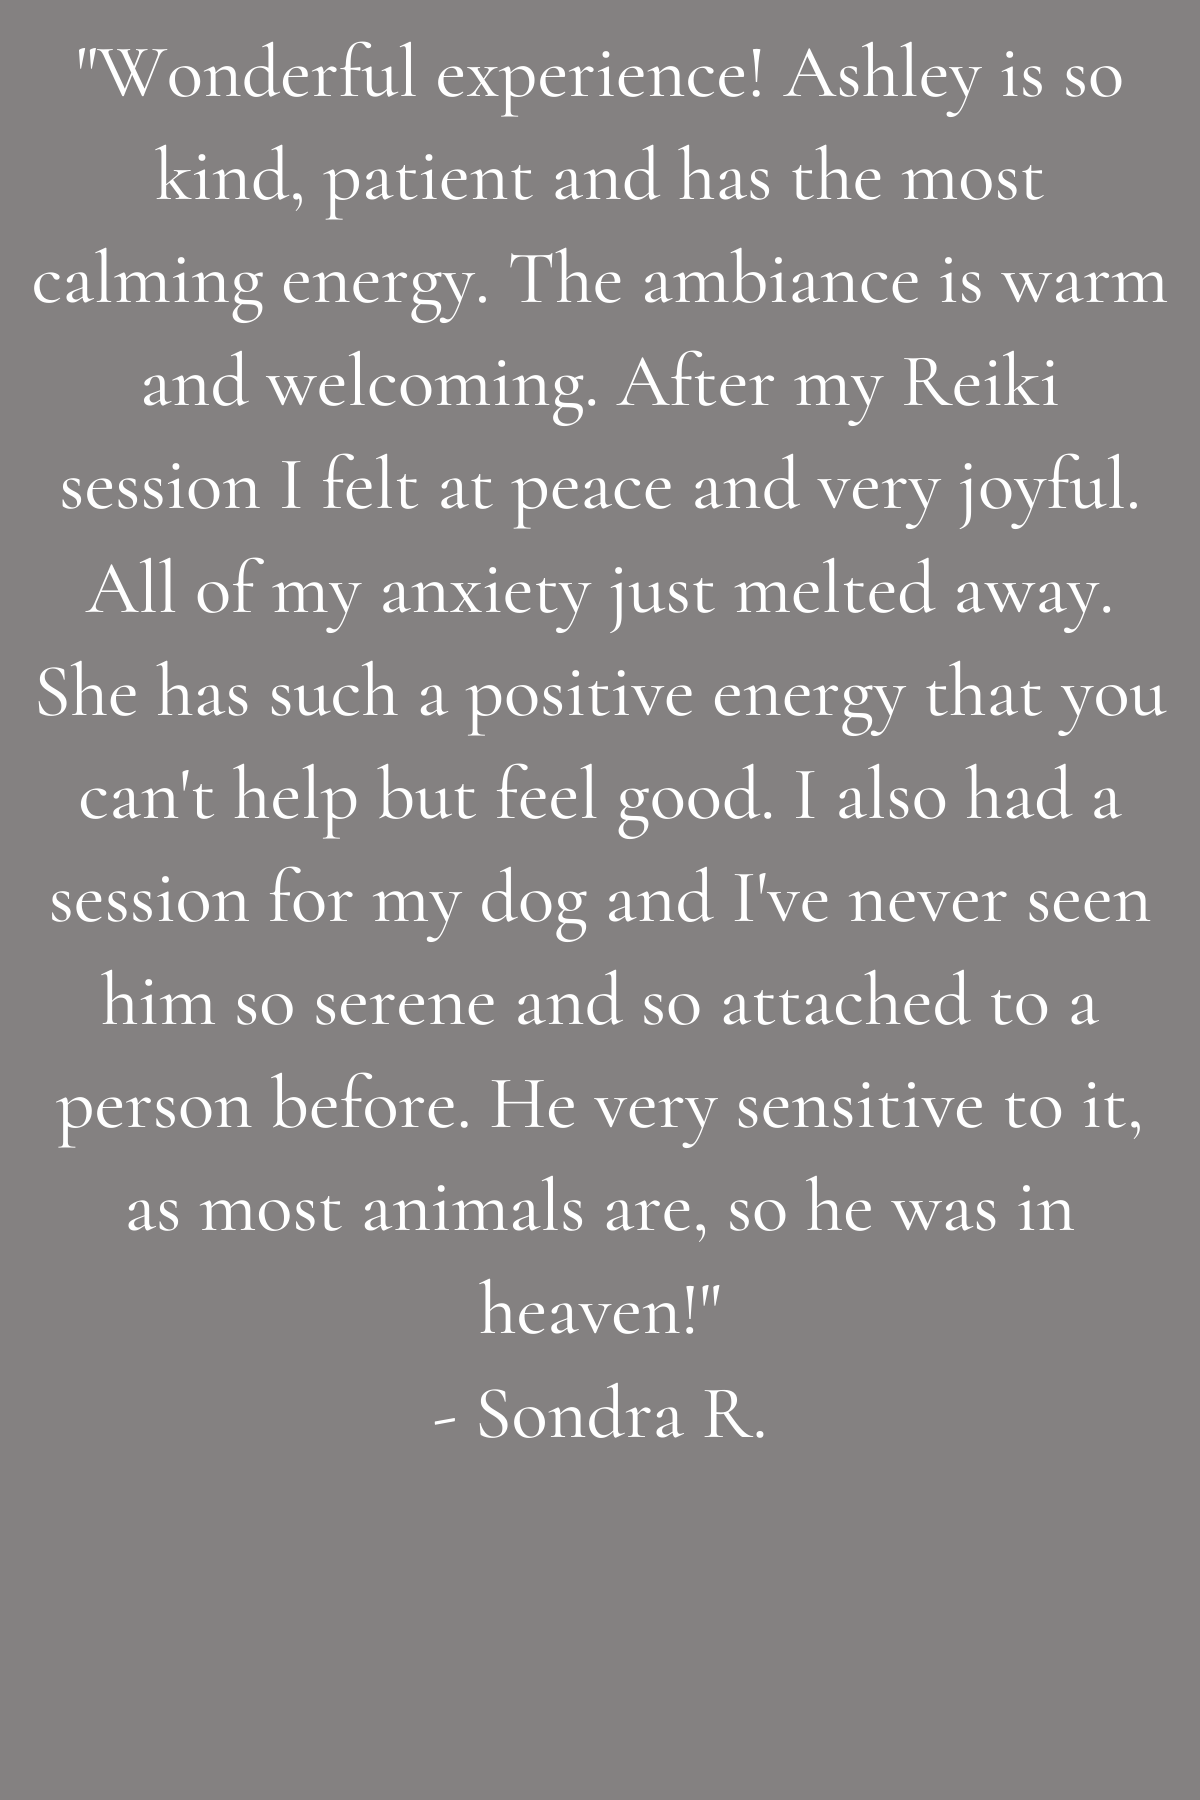 Copy of _Reiki sessions with Ashley are incredible. Throughout 10+ sessions (to-date), Ashley has warmly held space for me to honor my healing _progress through the process_. I came to Ashley with curiosity if Reiki .png